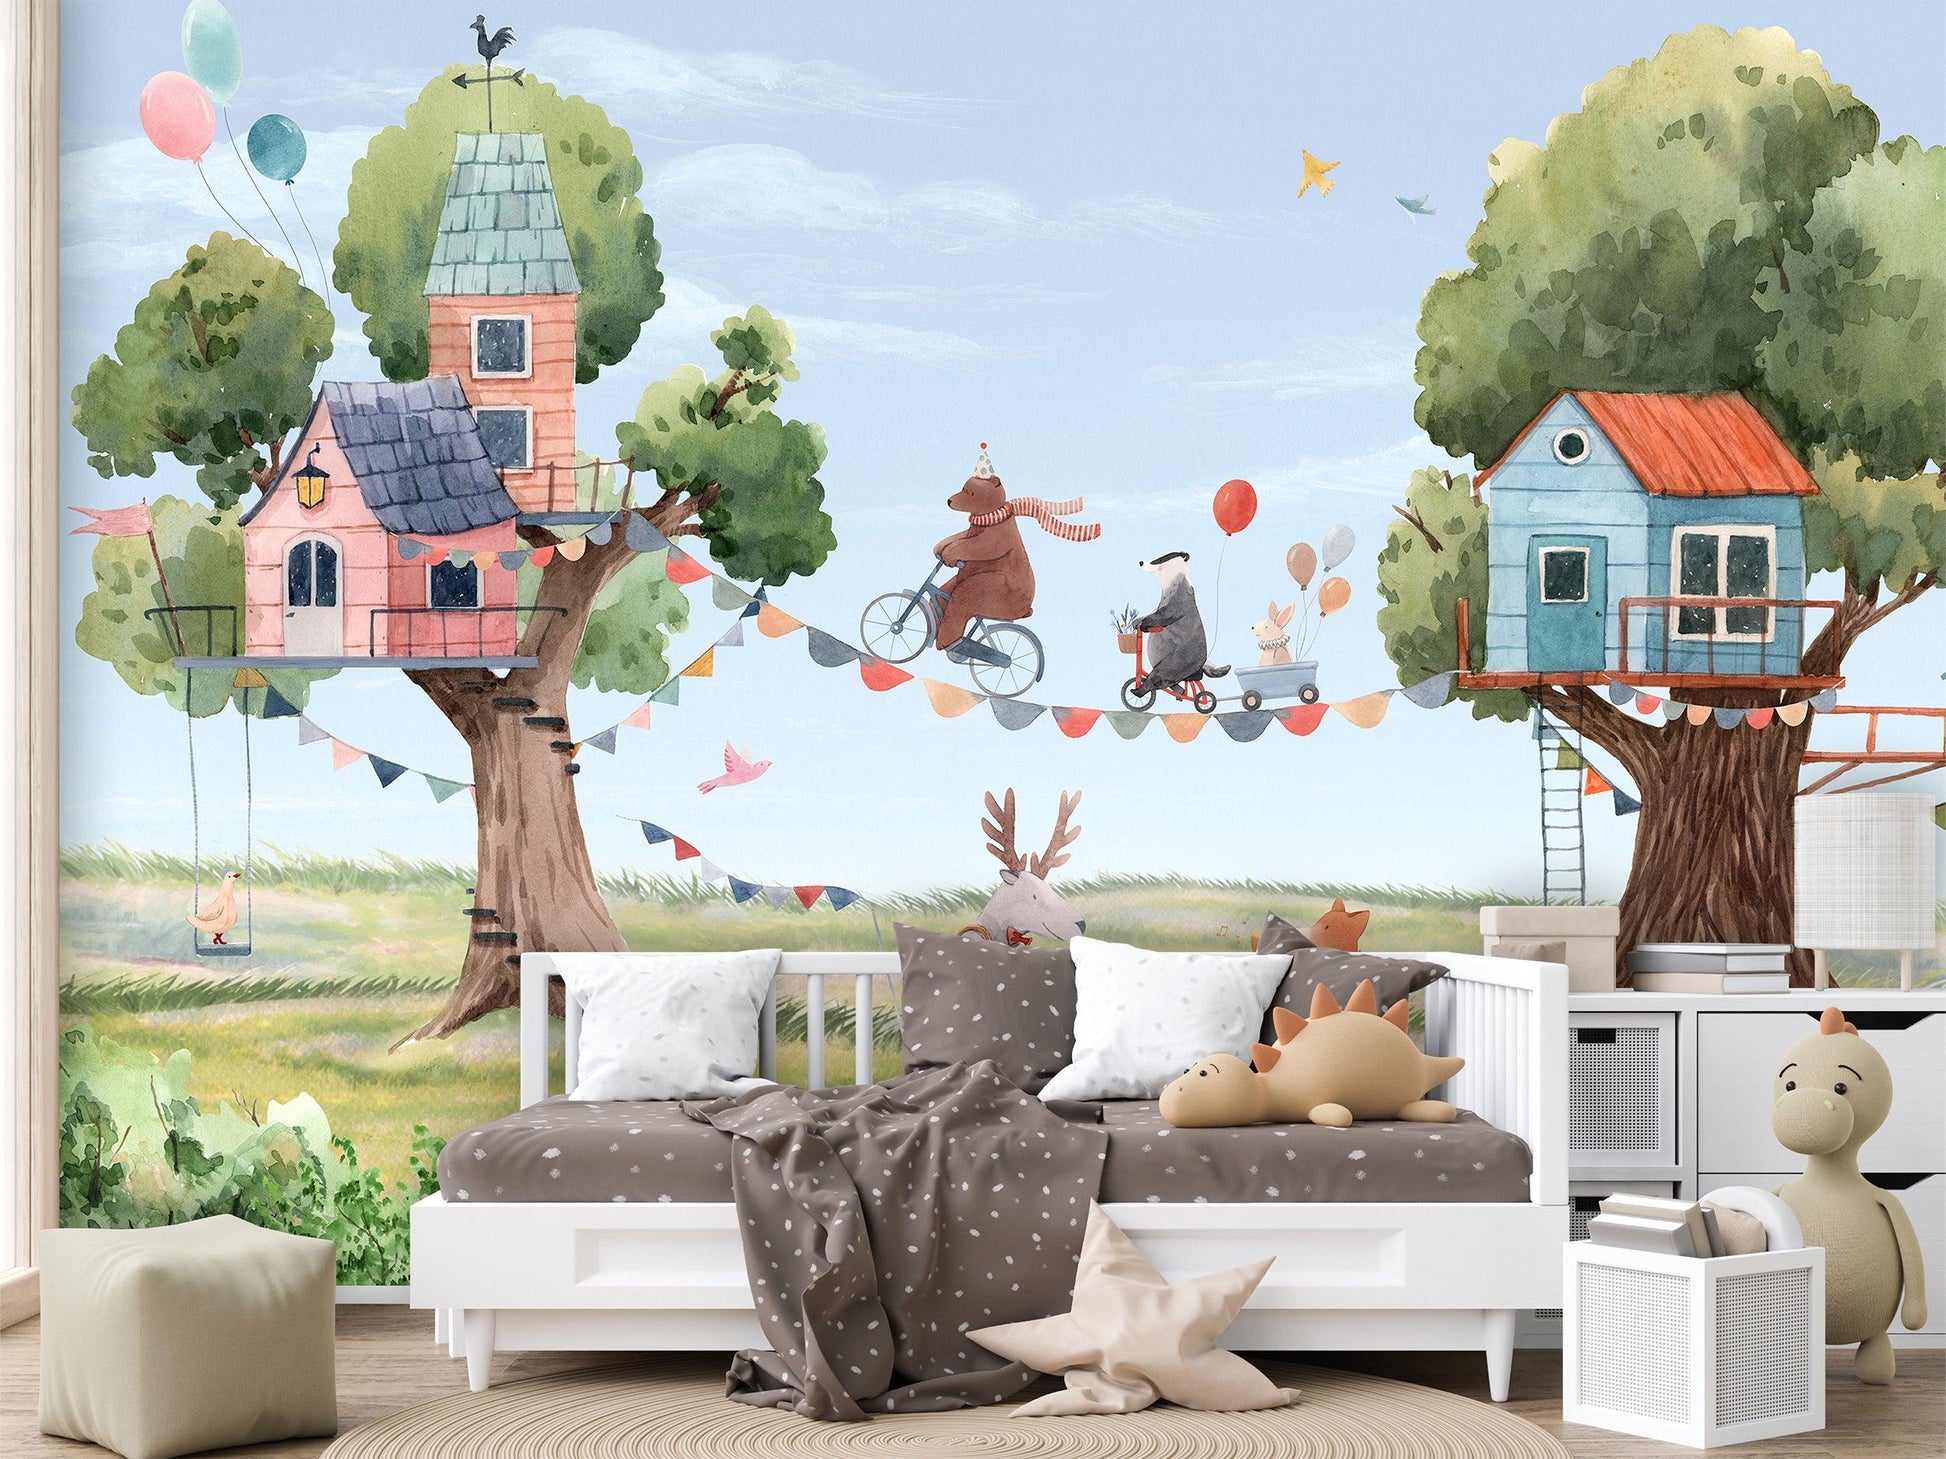 Treehouse Party Wallpaper Mural - MAIA HOMES